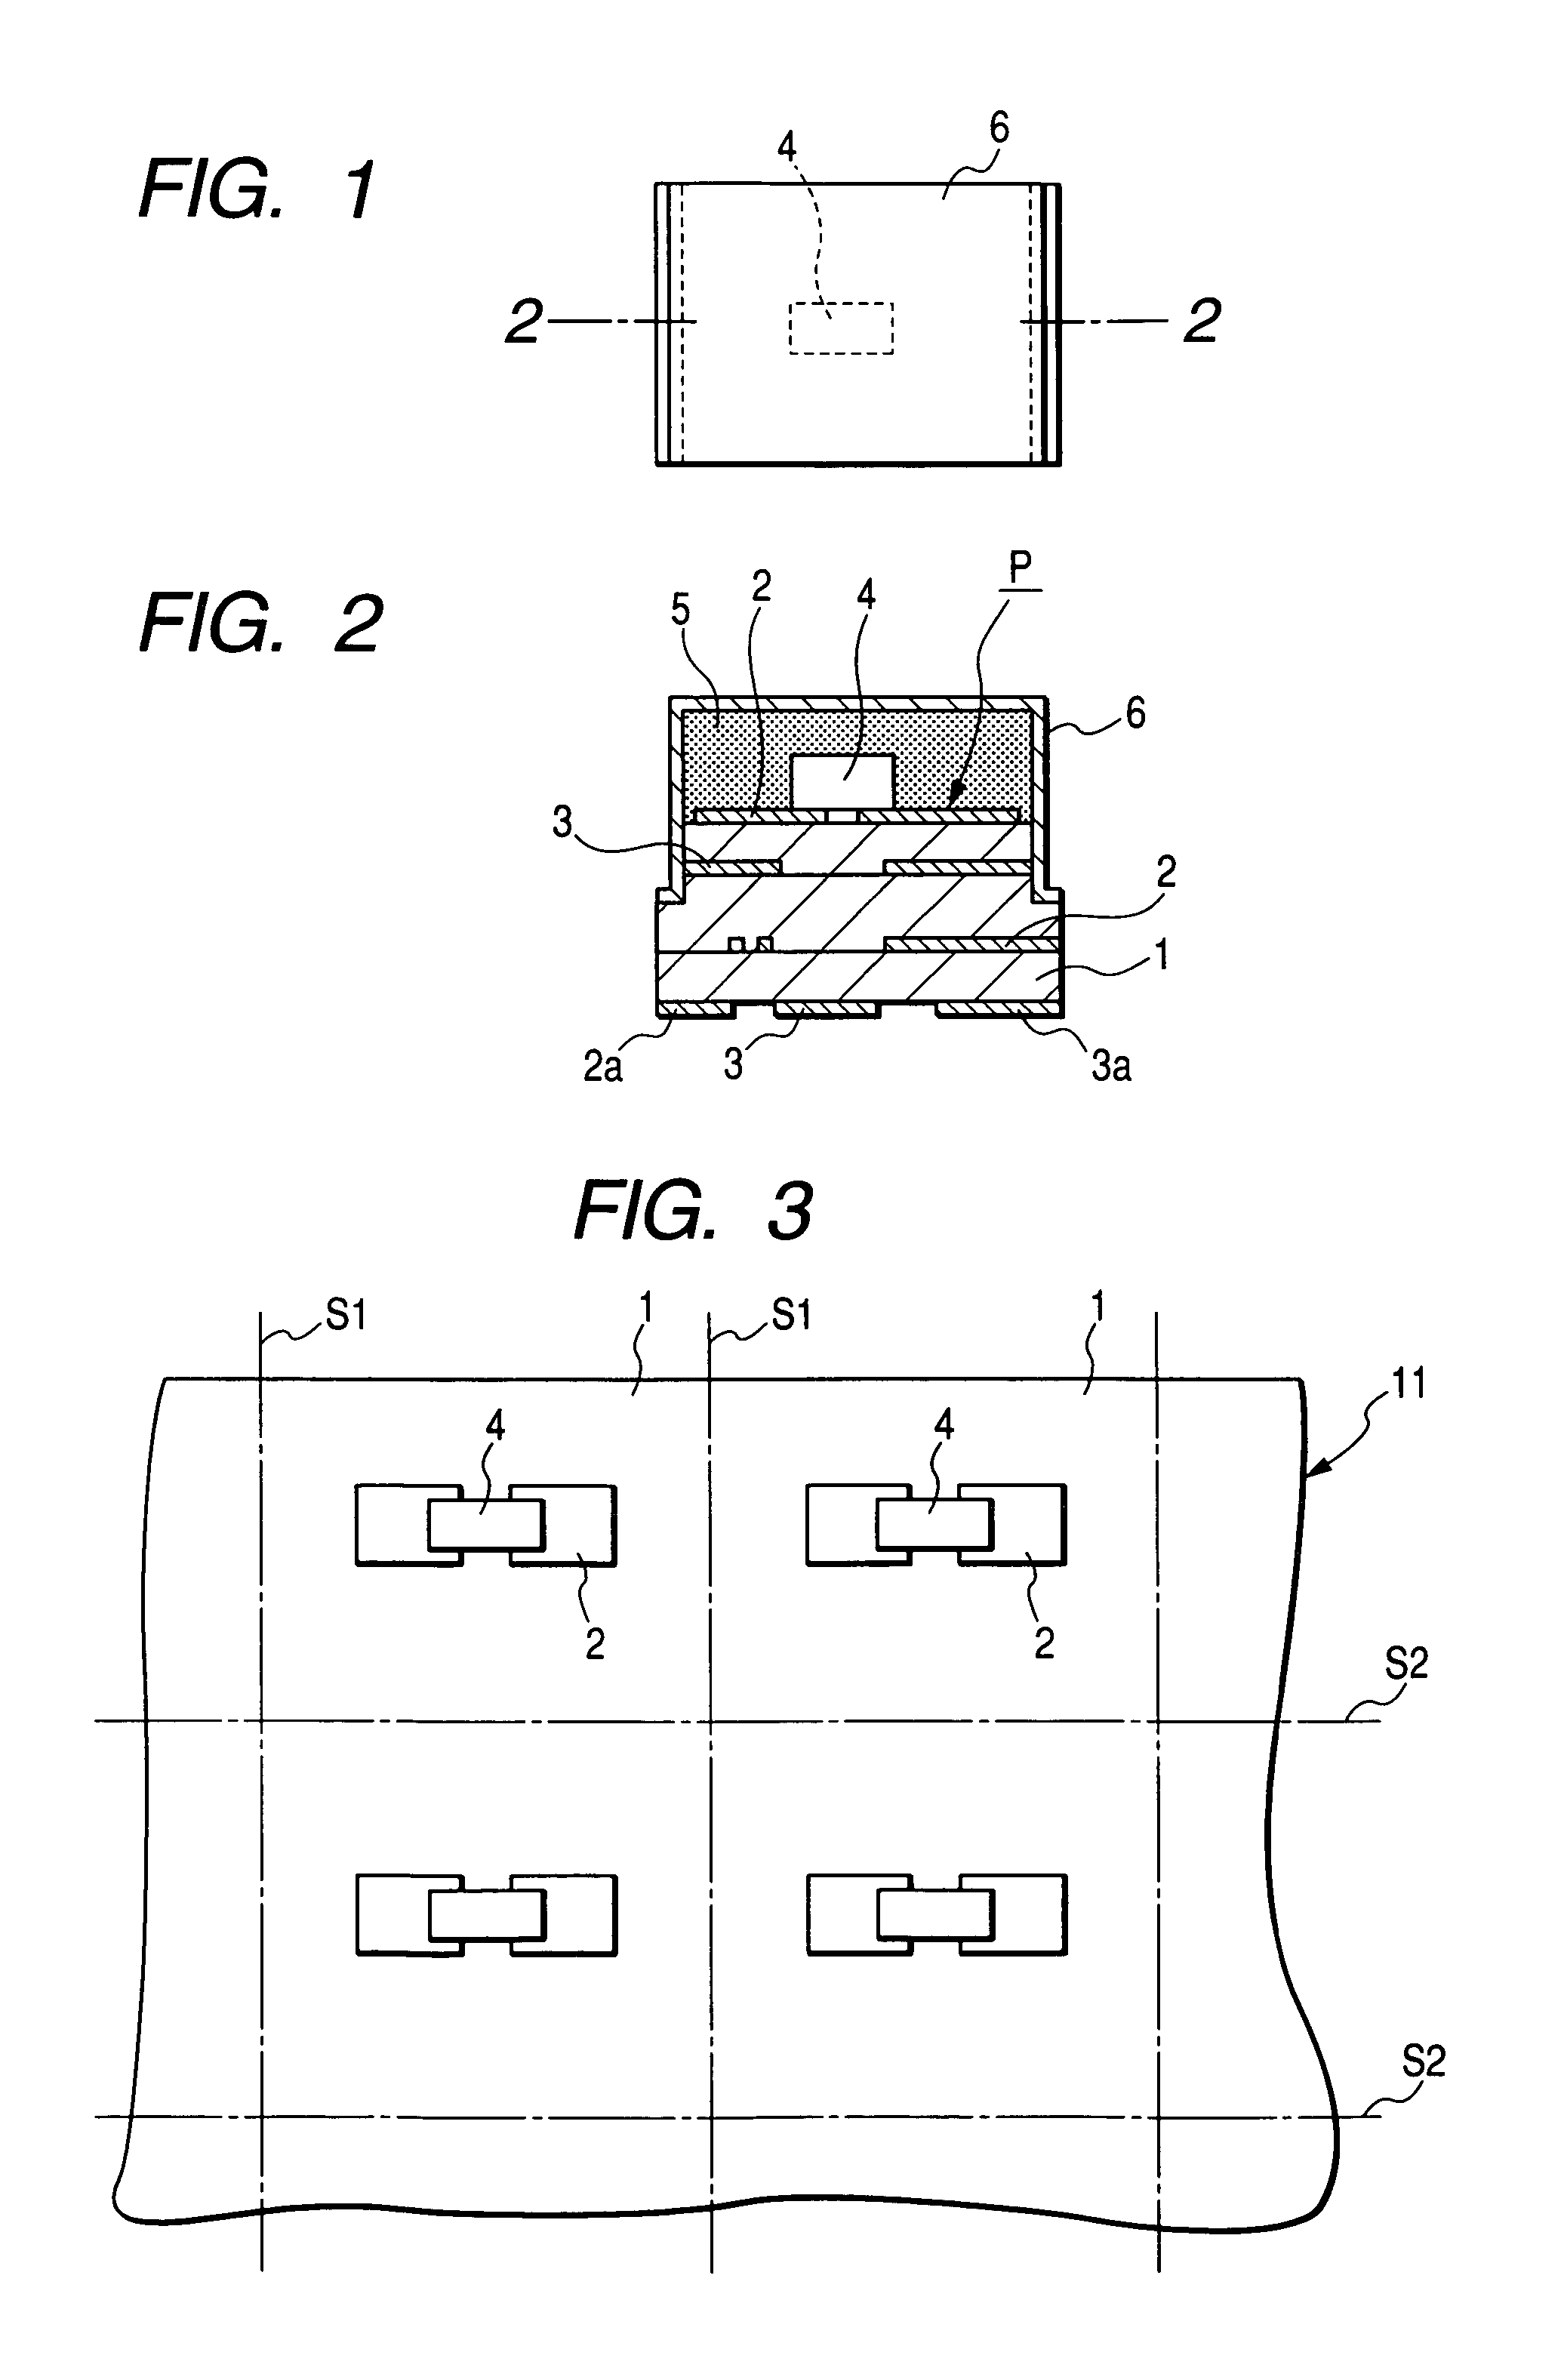 Method of manufacturing shielded electronic circuit units